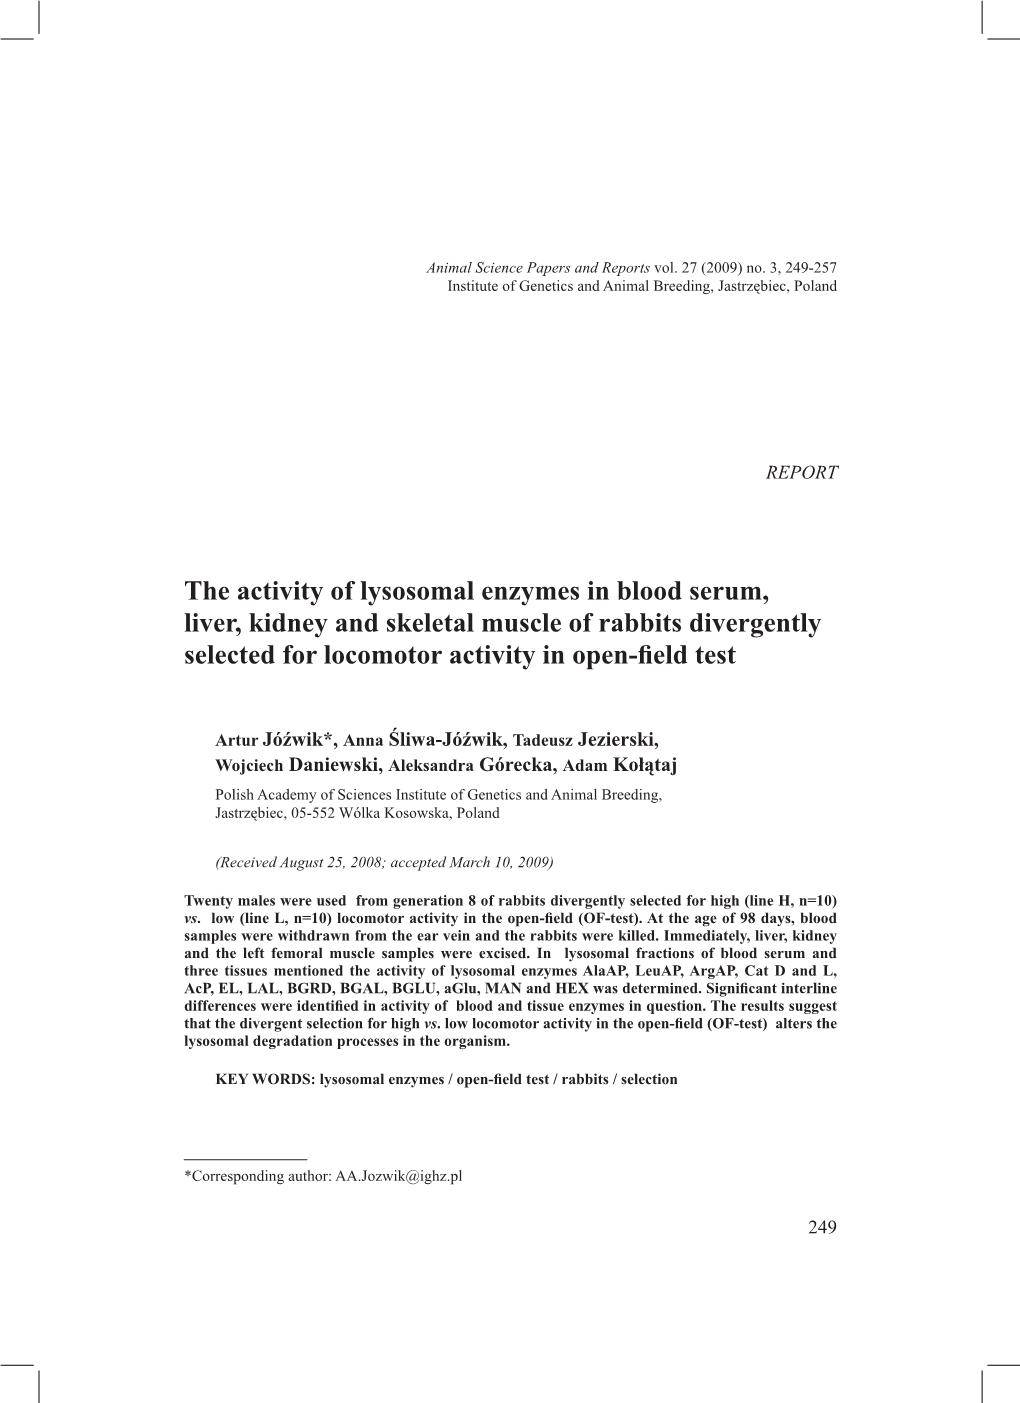 The Activity of Lysosomal Enzymes in Blood Serum, Liver, Kidney and Skeletal Muscle of Rabbits Divergently Selected for Locomotor Activity in Open-Field Test